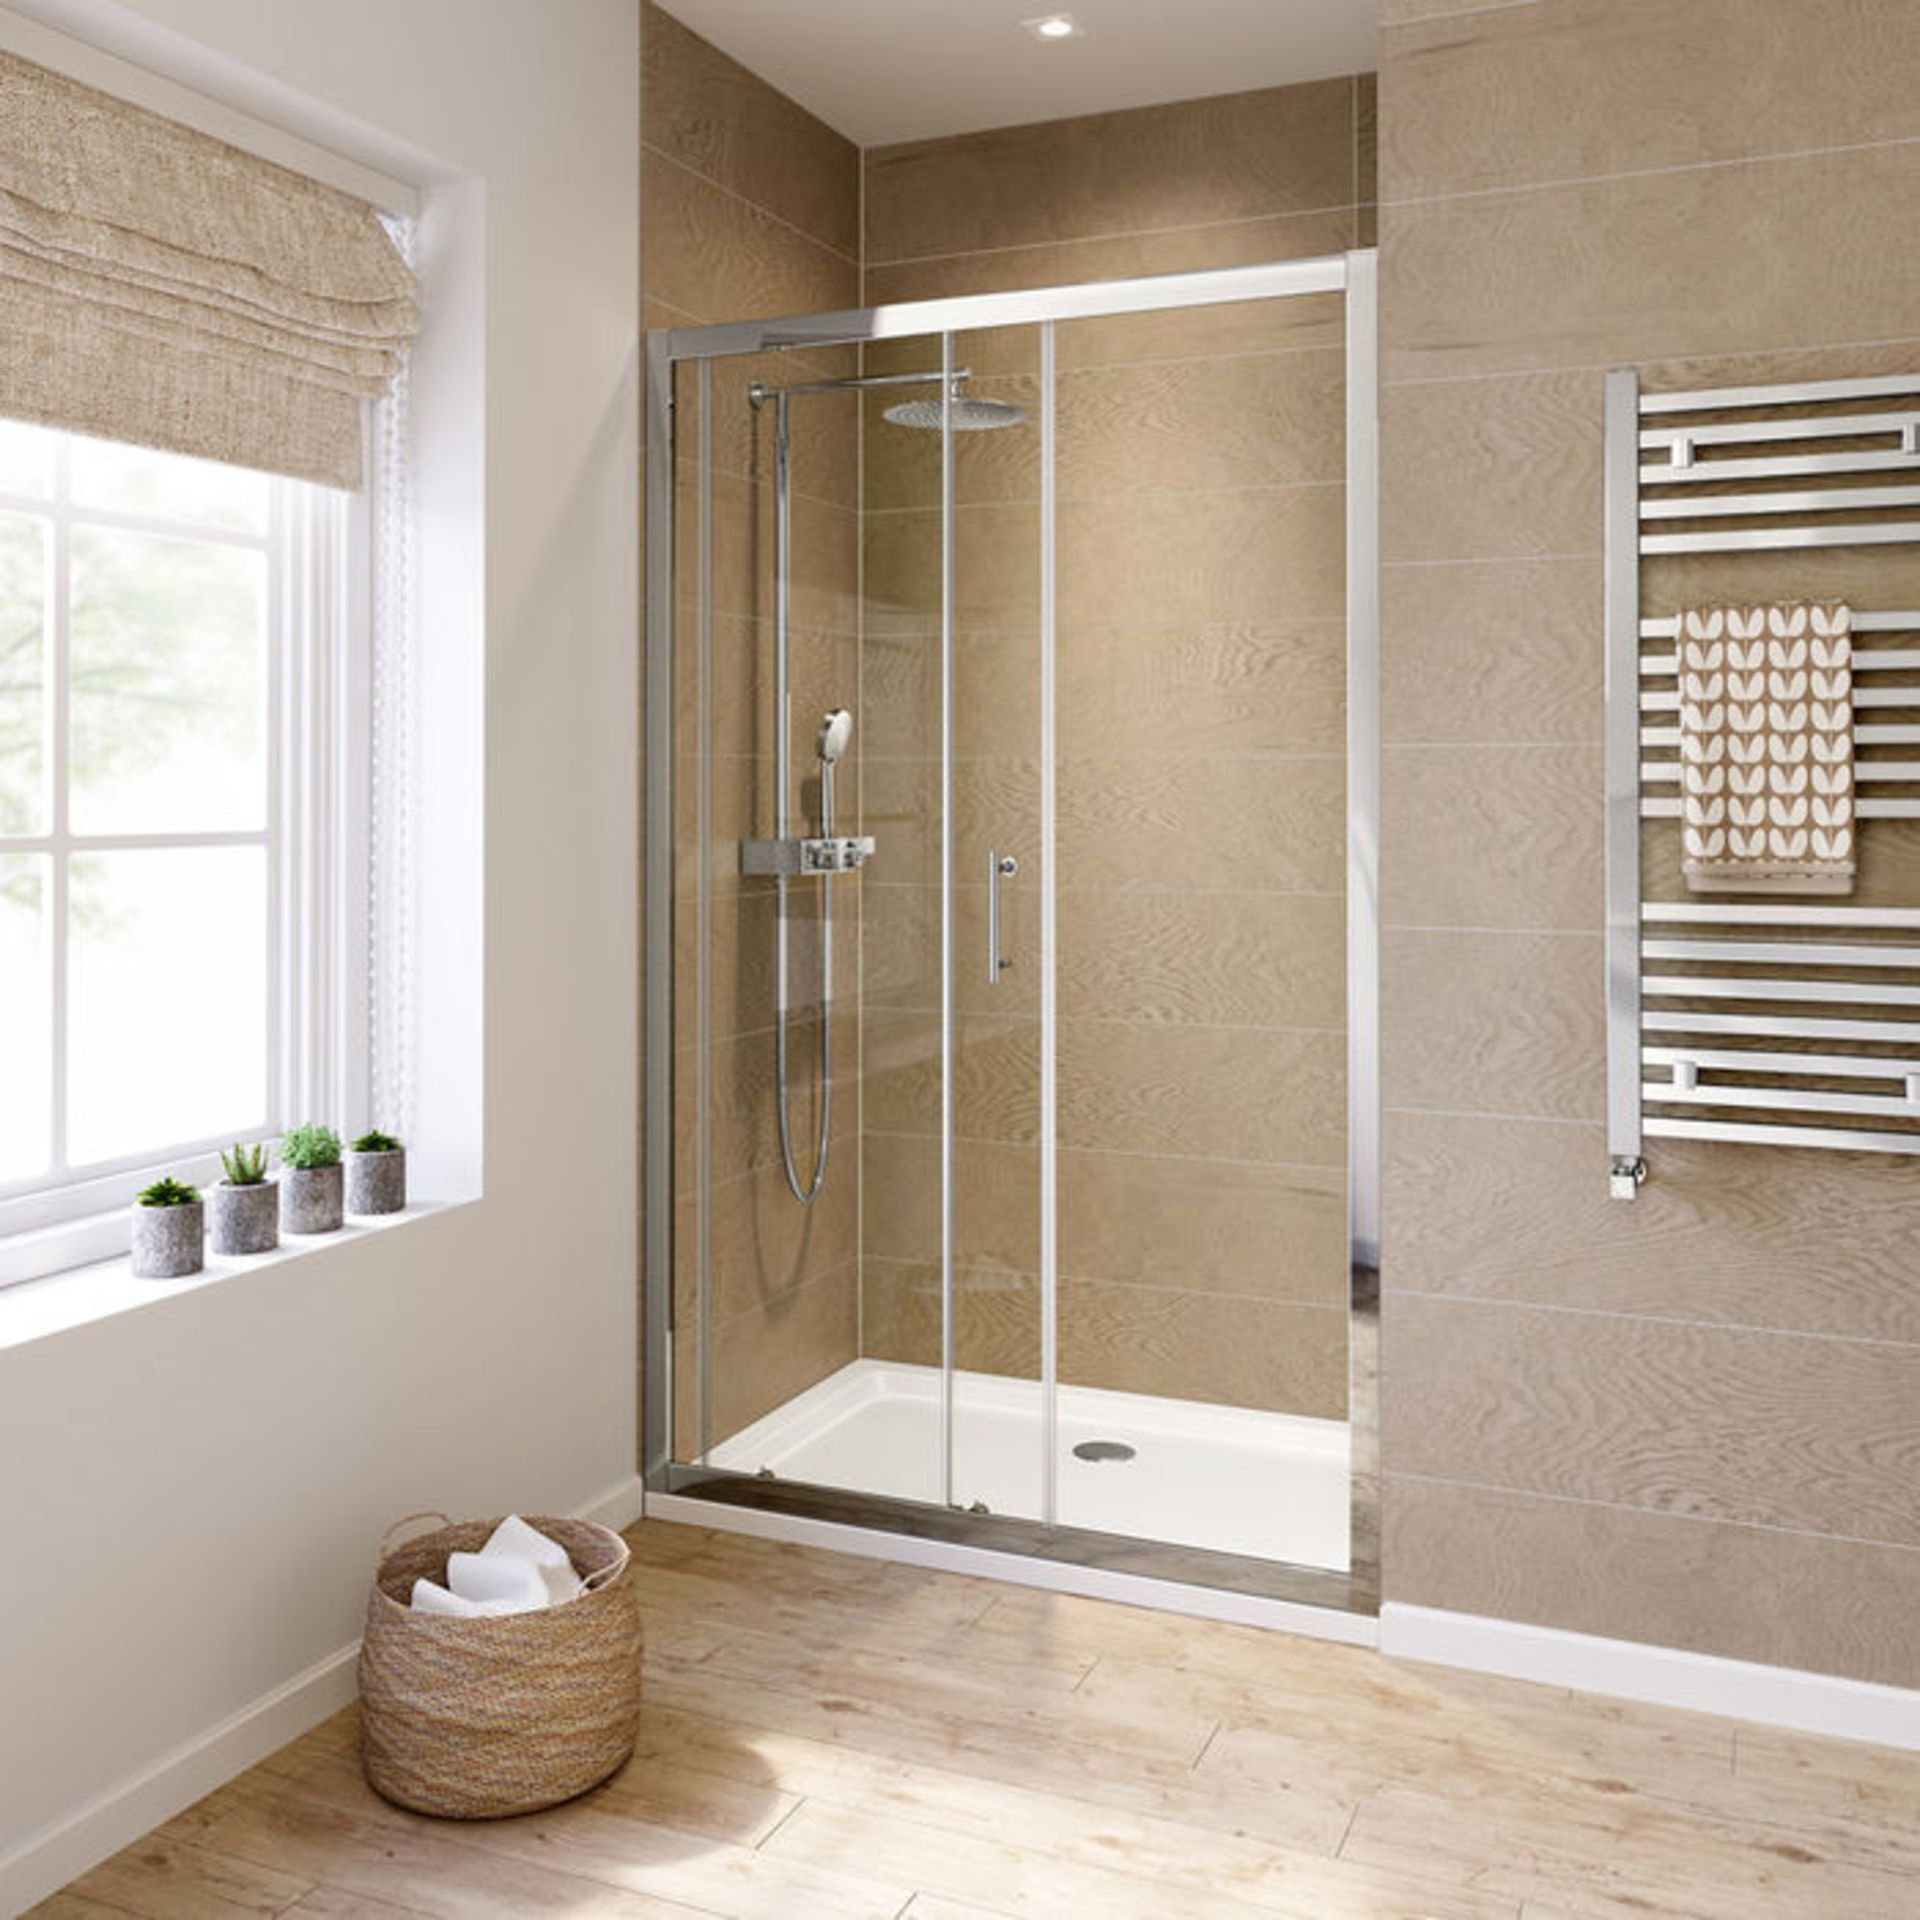 (YC165) 1000mm - 4mm - Elements Sliding Shower Door. RRP £299.99. 6mm Safety Glass Fully - Image 3 of 4